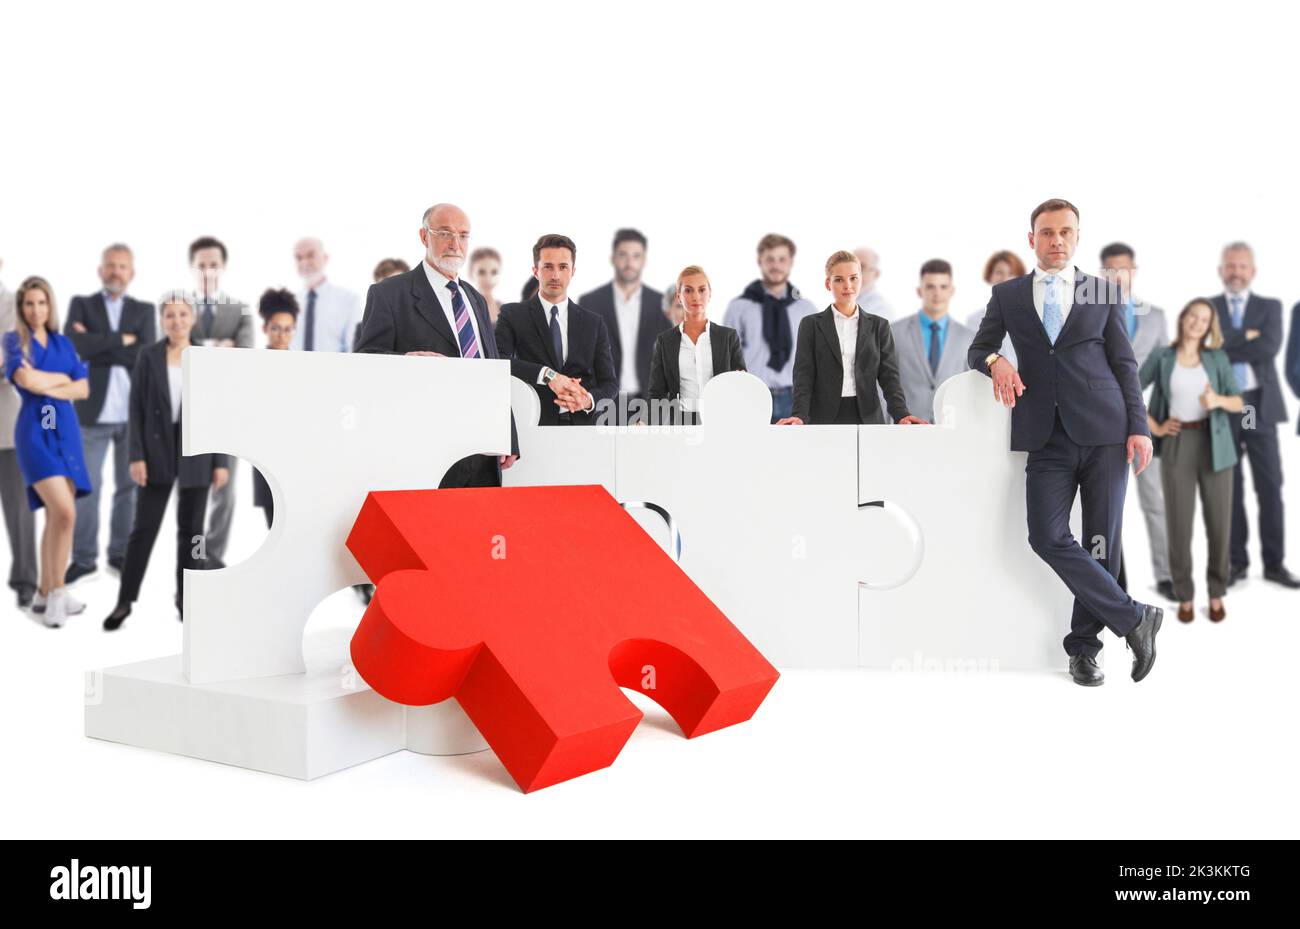 Business people team with giant puzzle pieces studio isolated on white background. Partnership teamwork cooperation collaboration concept. Stock Photo